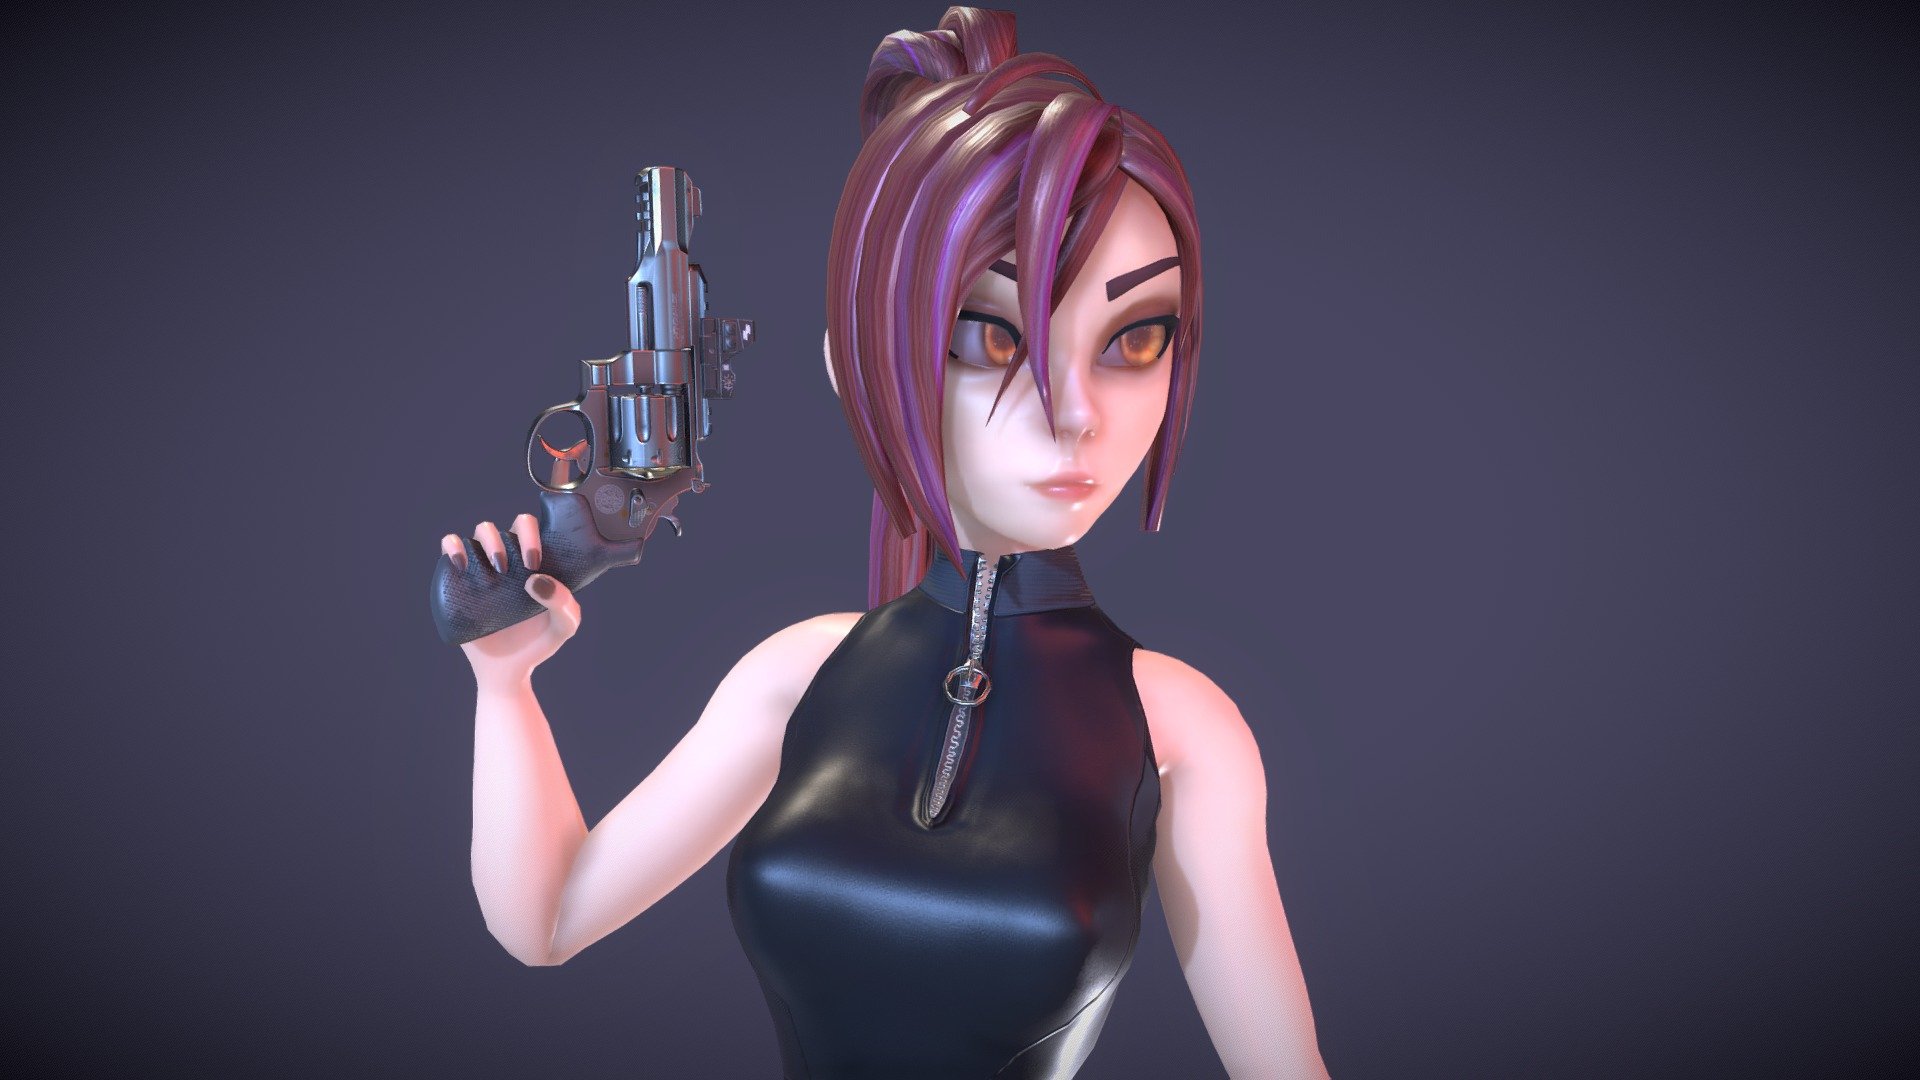 Made with blender and substance painter. (marmoset for baking).
See more at https://www.artstation.com/artwork/GeZk04 :) - Stylized woman with a revolver - 3D model by Ludovic Bronckart (@swipe243) 3d model